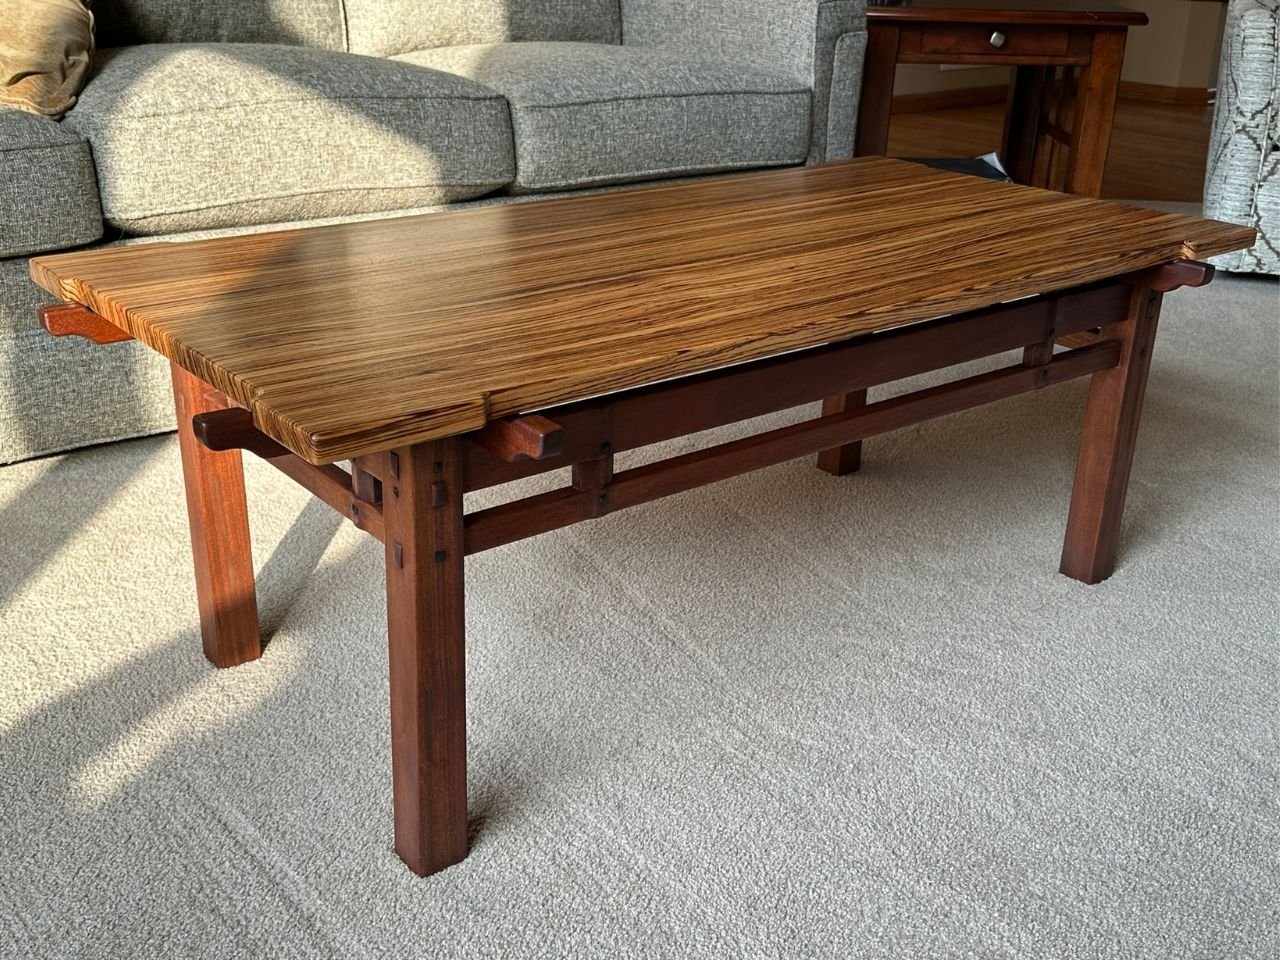 Darrell Peart's Rafter Tail Coffee Table.jpg